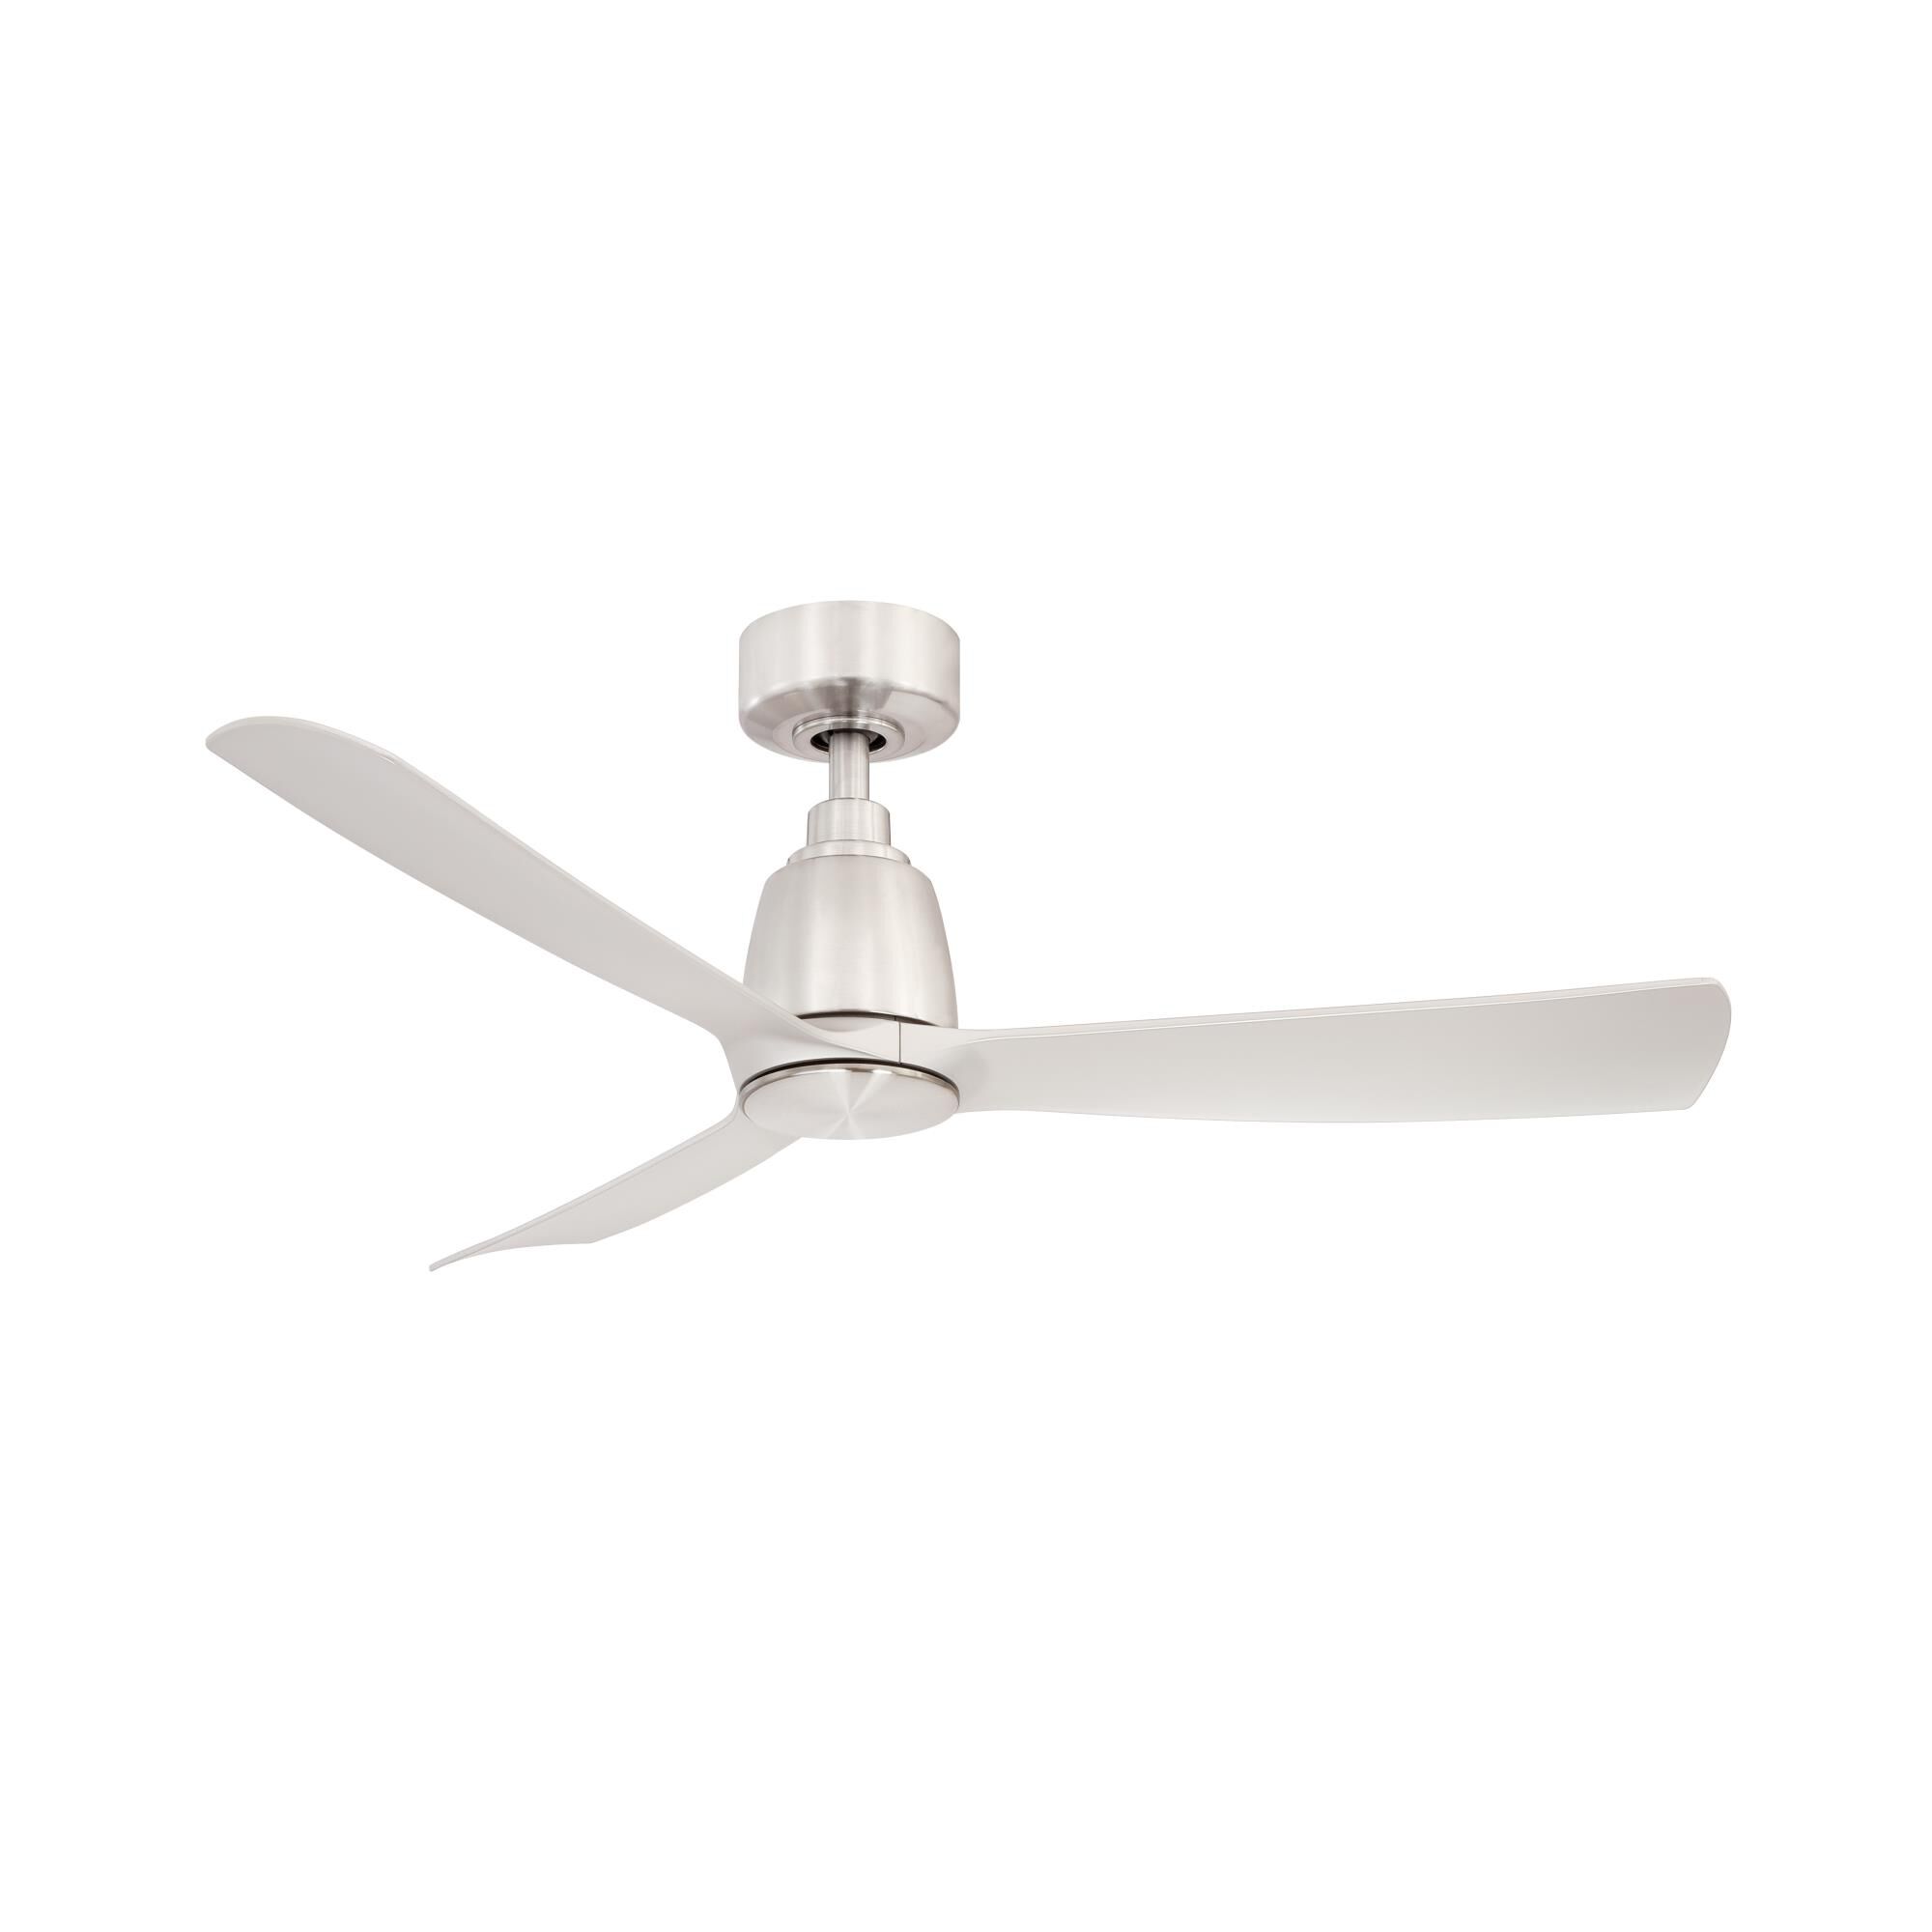 Photos - Fan imation Kute Ceiling  Kute - FPD8547BN - Modern Contemporary FPD8547